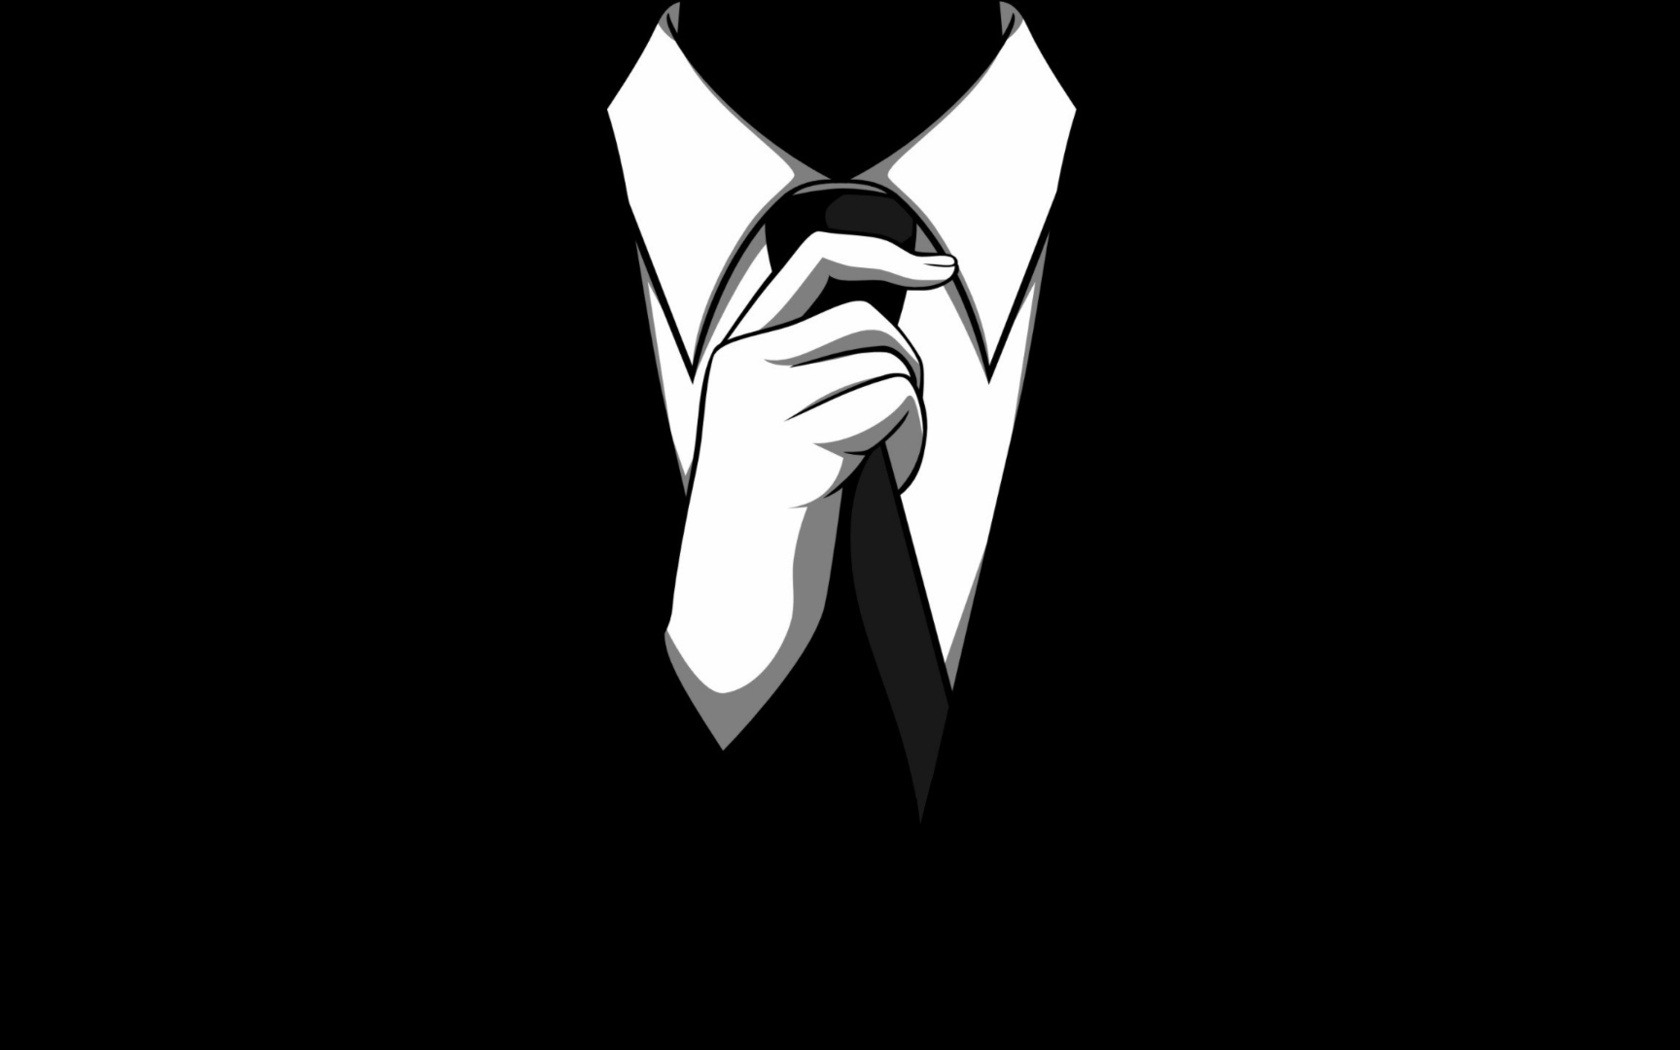 anonymous black suit tie white shirt 1680x1050 wallpaper High Quality Wallpaper, High Definition Wallpaper